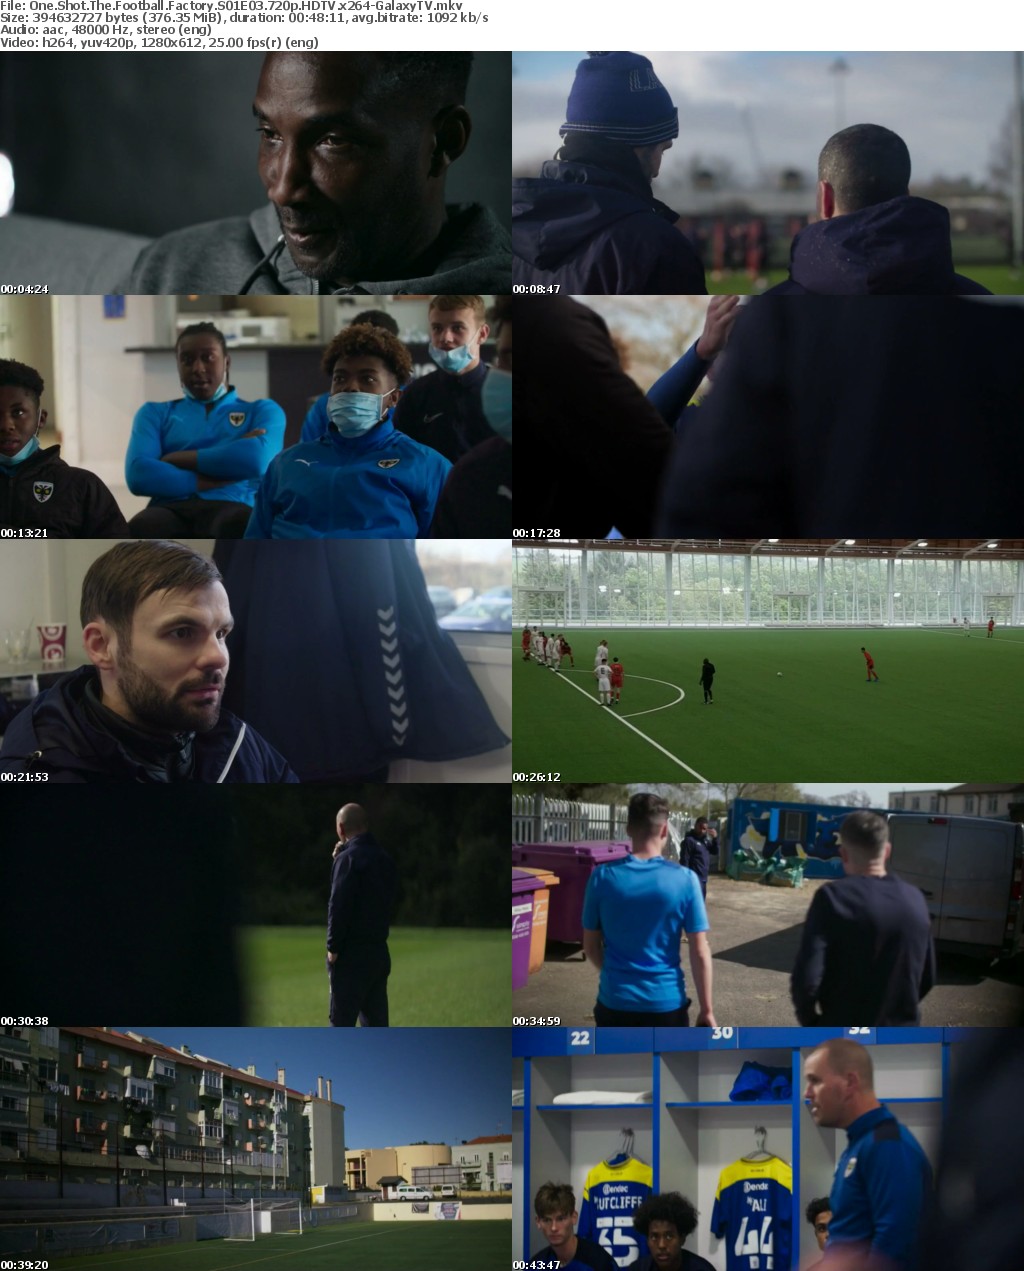 One Shot The Football Factory S01 COMPLETE 720p HDTV x264-GalaxyTV